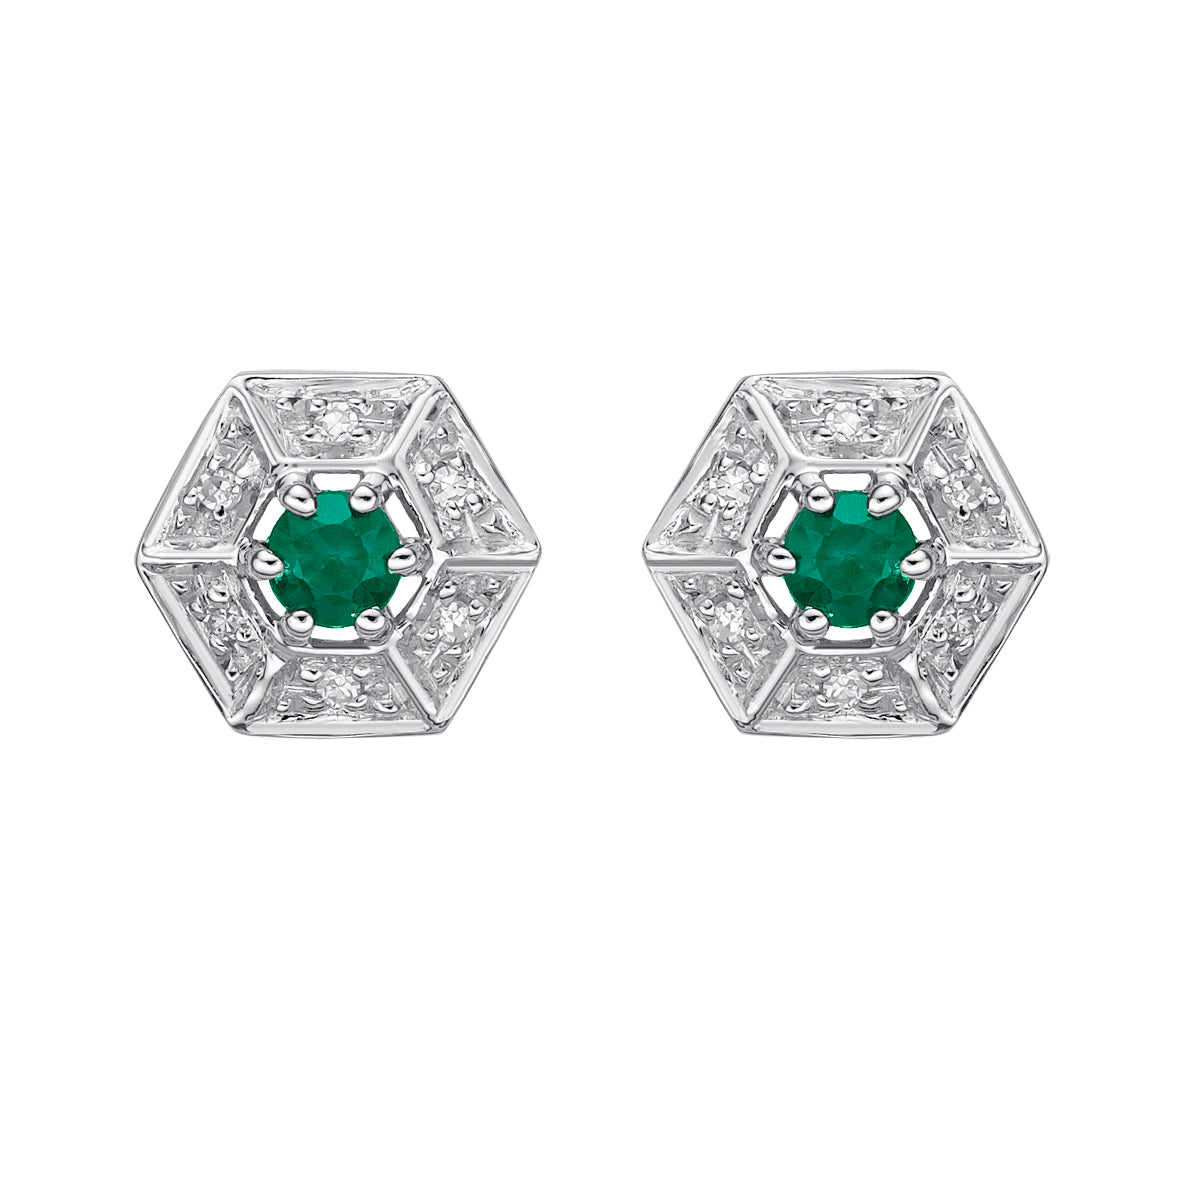 10K White Gold Prong-set Emerald Earrings with Diamond Halo